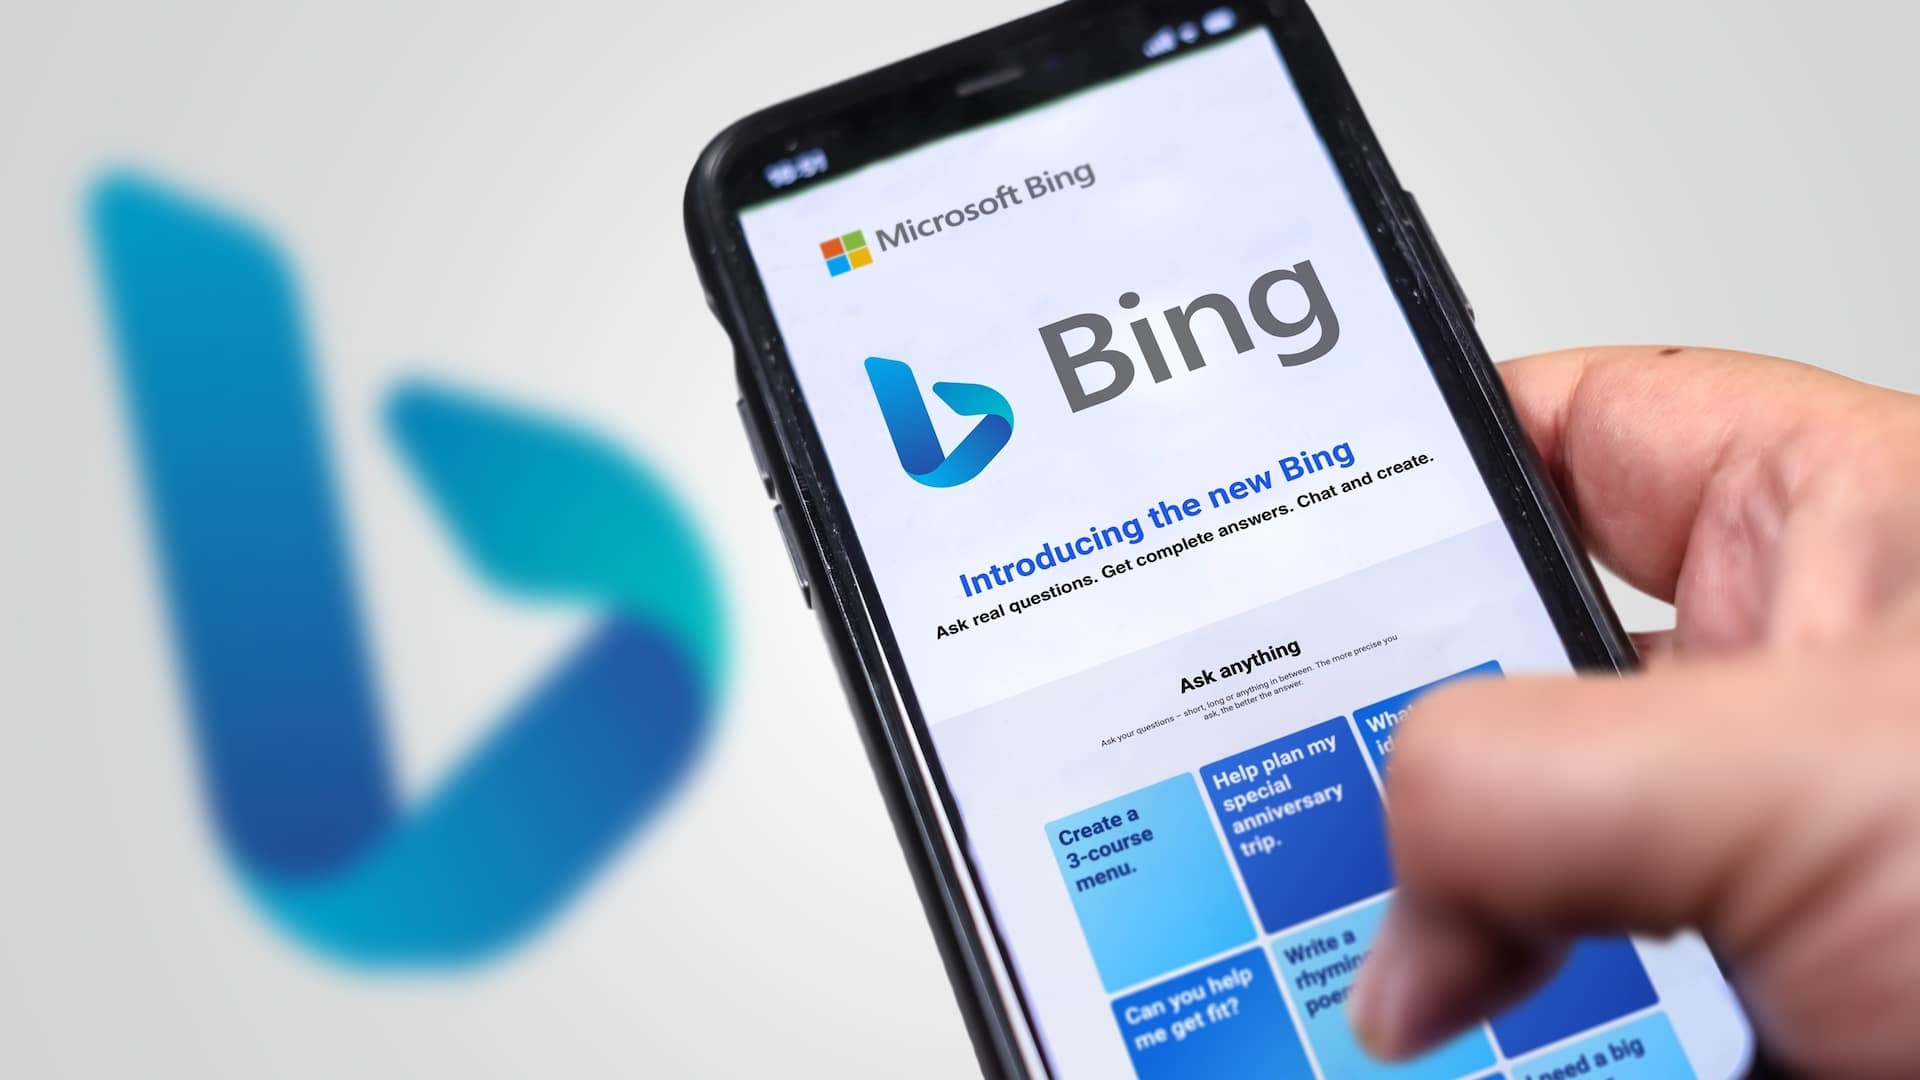 #Microsoft serving ads for Bing in Google Chrome